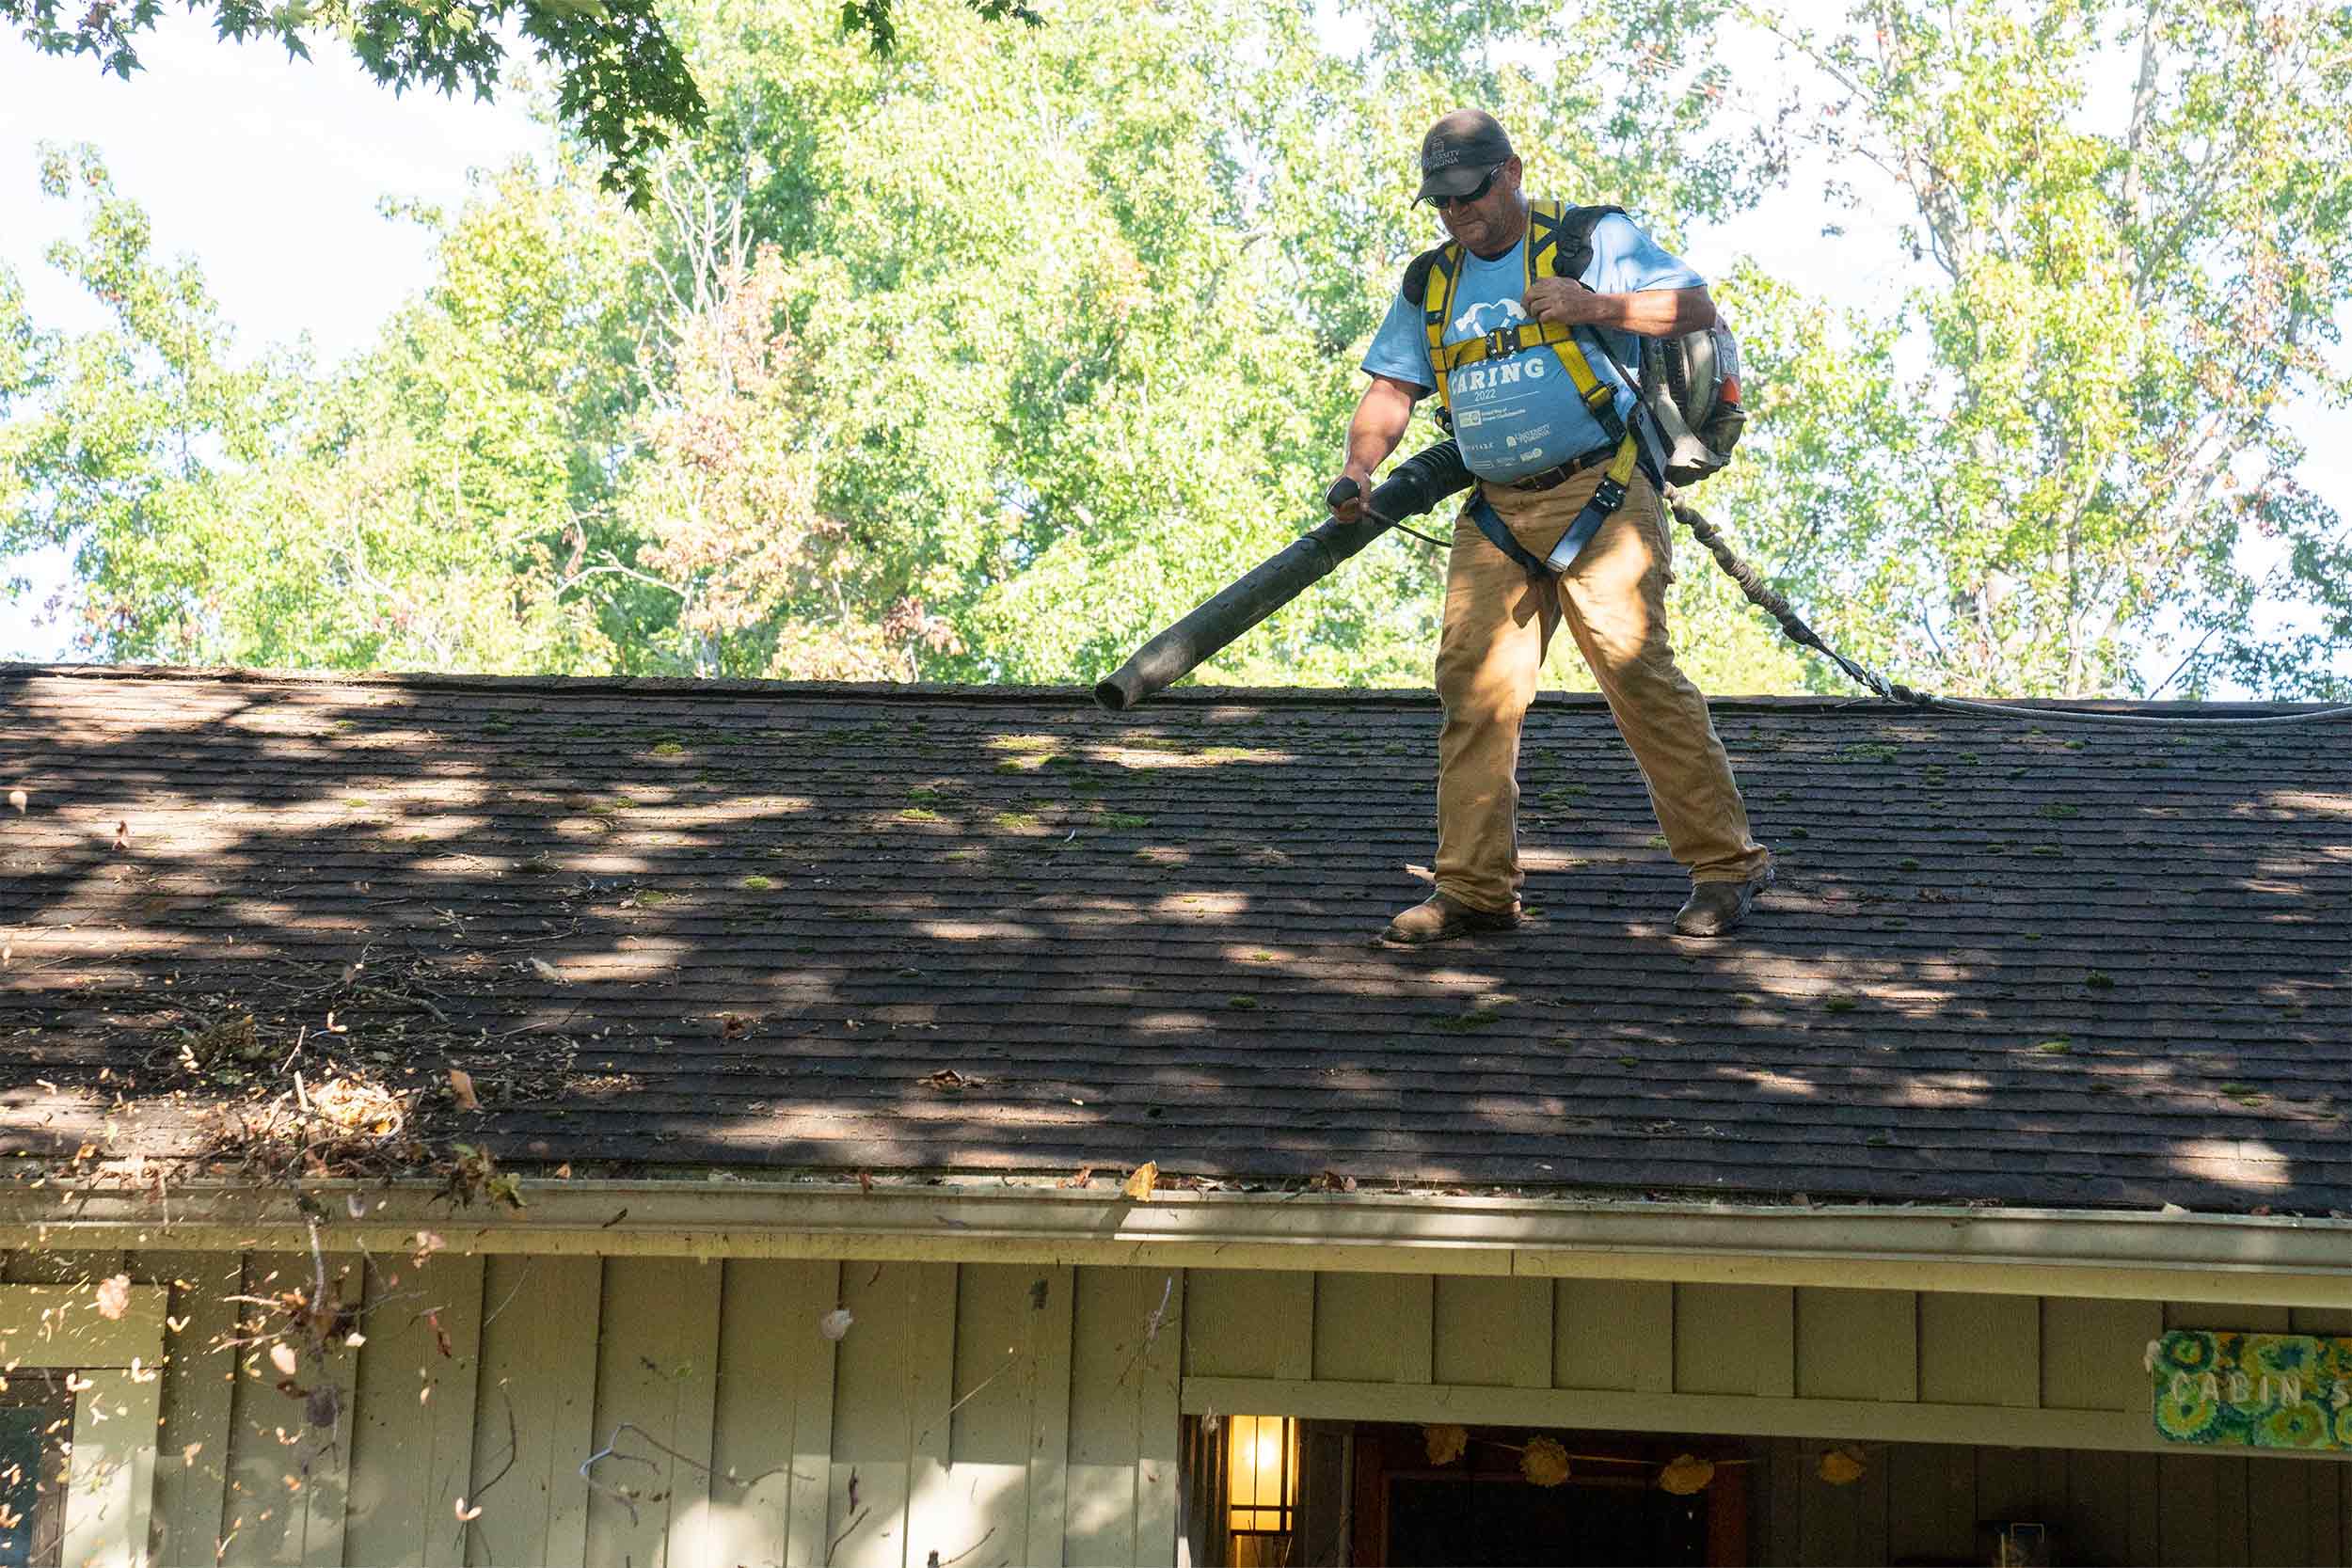 A man with a leaf blower on a building roof cleans out the gutters.